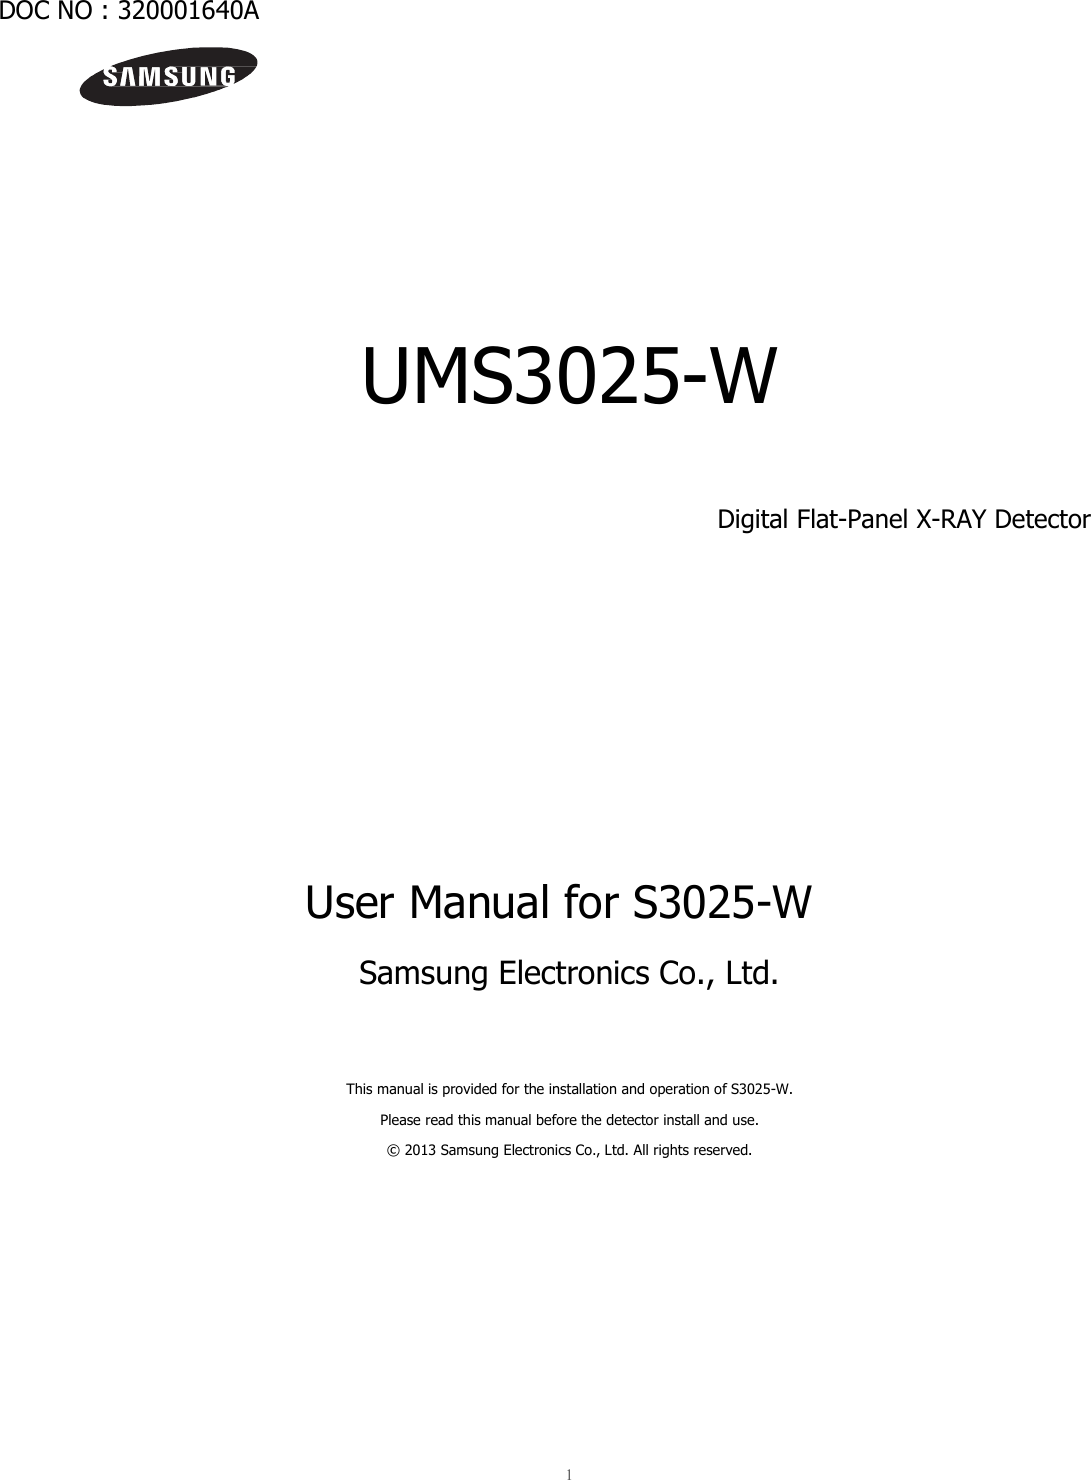  1   DOC NO : 320001640A           UMS3025-W  Digital Flat-Panel X-RAY Detector           User Manual for S3025-W Samsung Electronics Co., Ltd.   This manual is provided for the installation and operation of S3025-W. Please read this manual before the detector install and use. © 2013 Samsung Electronics Co., Ltd. All rights reserved.     